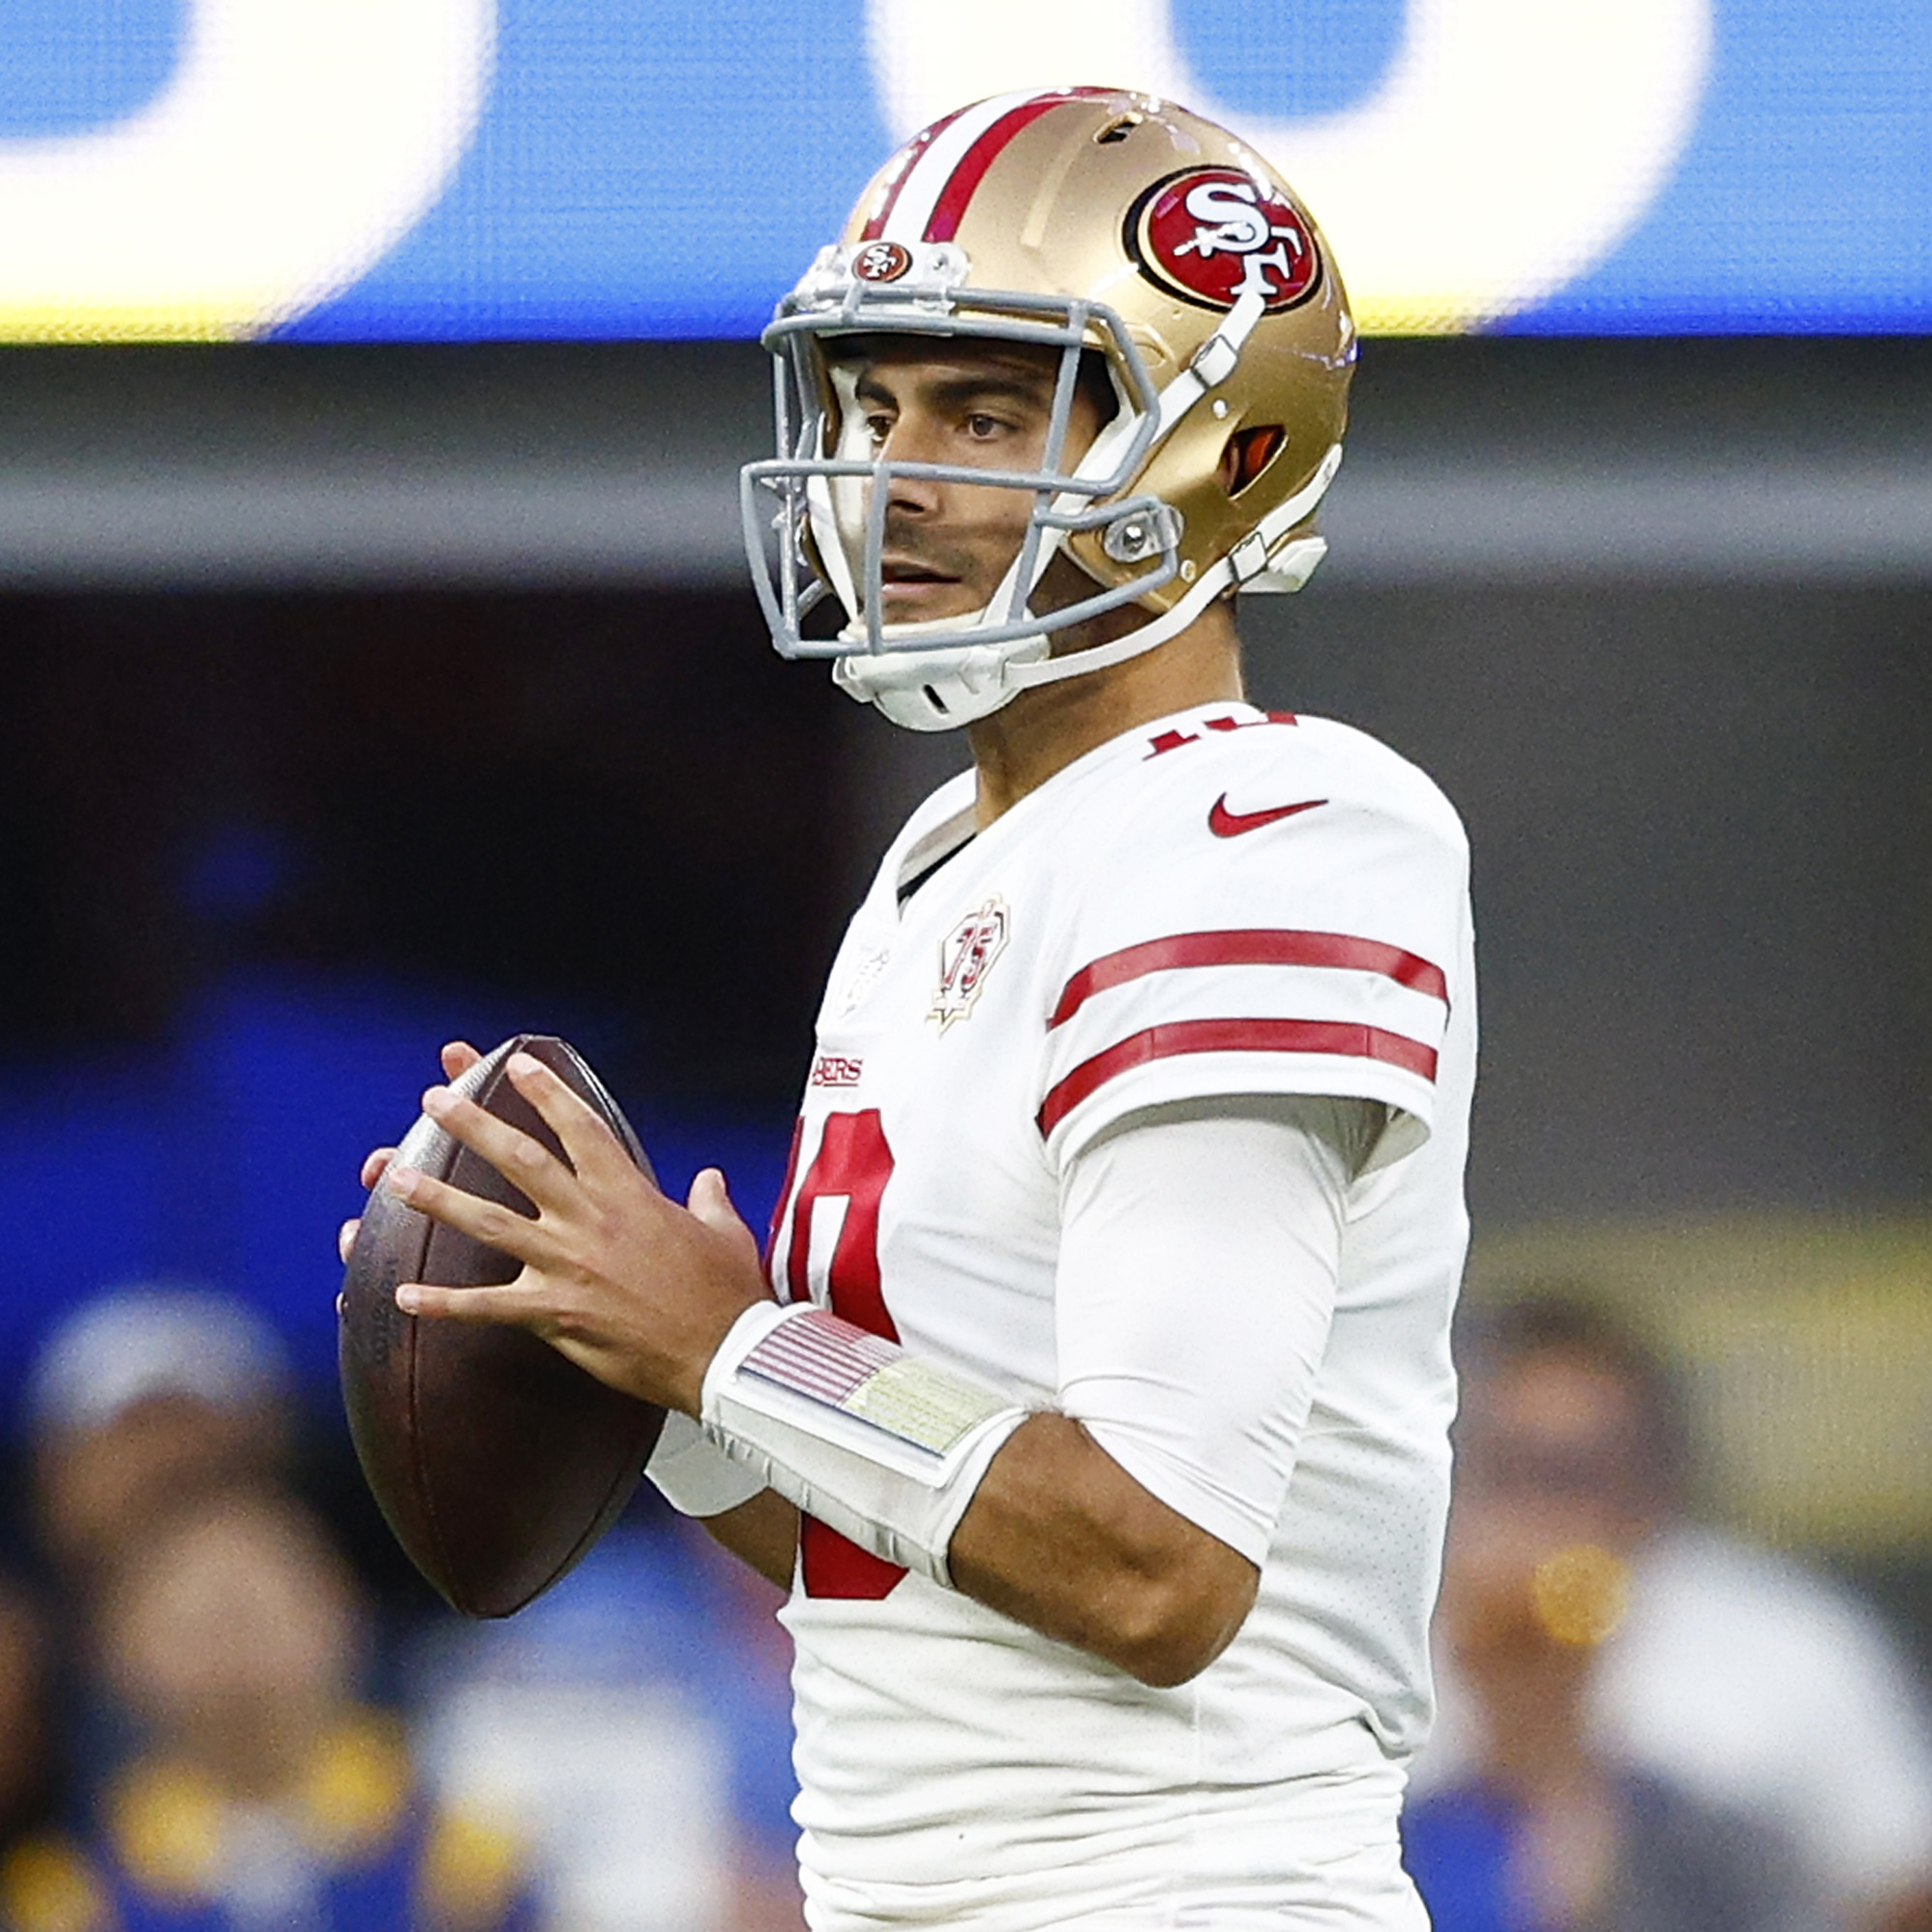 Jimmy Garoppolo Rumors: Seahawks Have Discussed Possibility of Trading for 49ers..